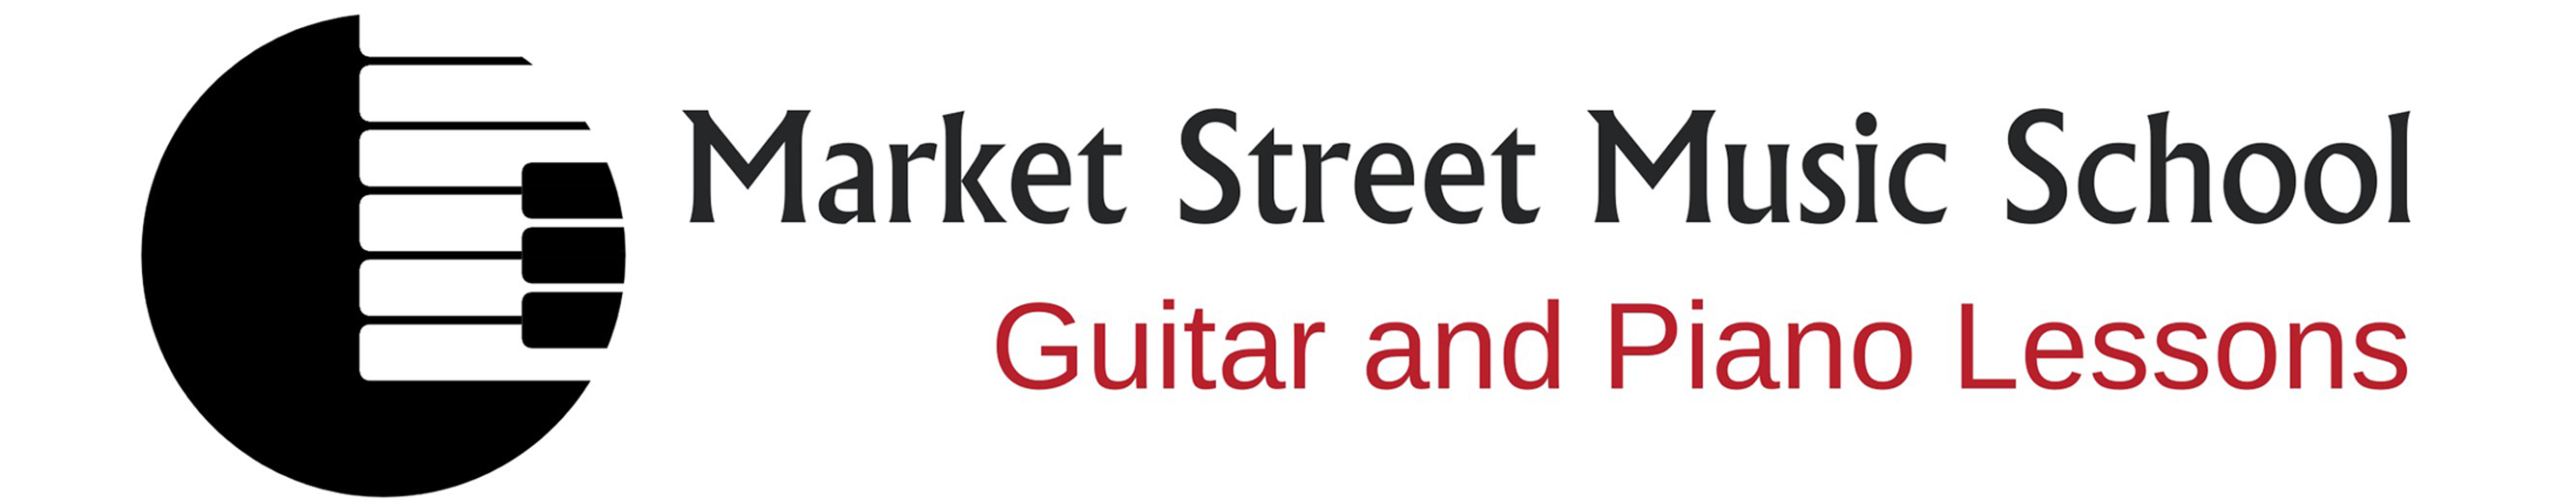 Seattle Guitar Lessons Seattle Piano Lessons - Seattle Guitar Lessons Seattle Piano Lessons